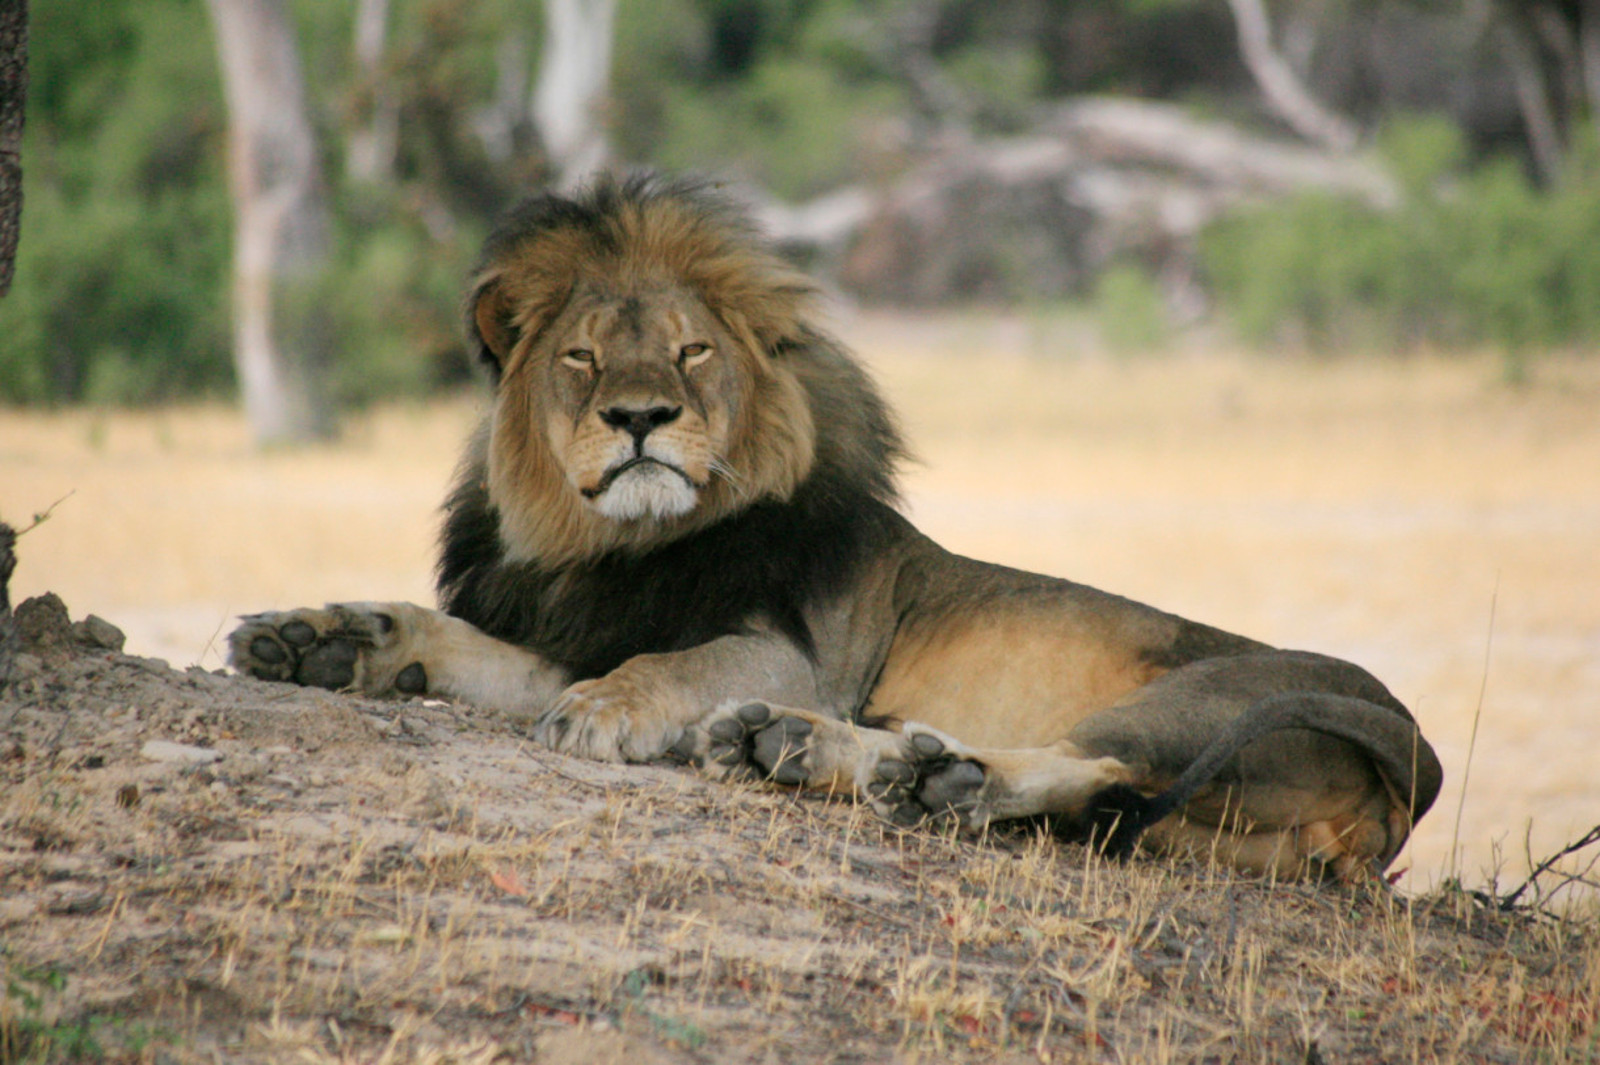 Time for Major Airlines to Stop Shipping Africa Big Five Trophies